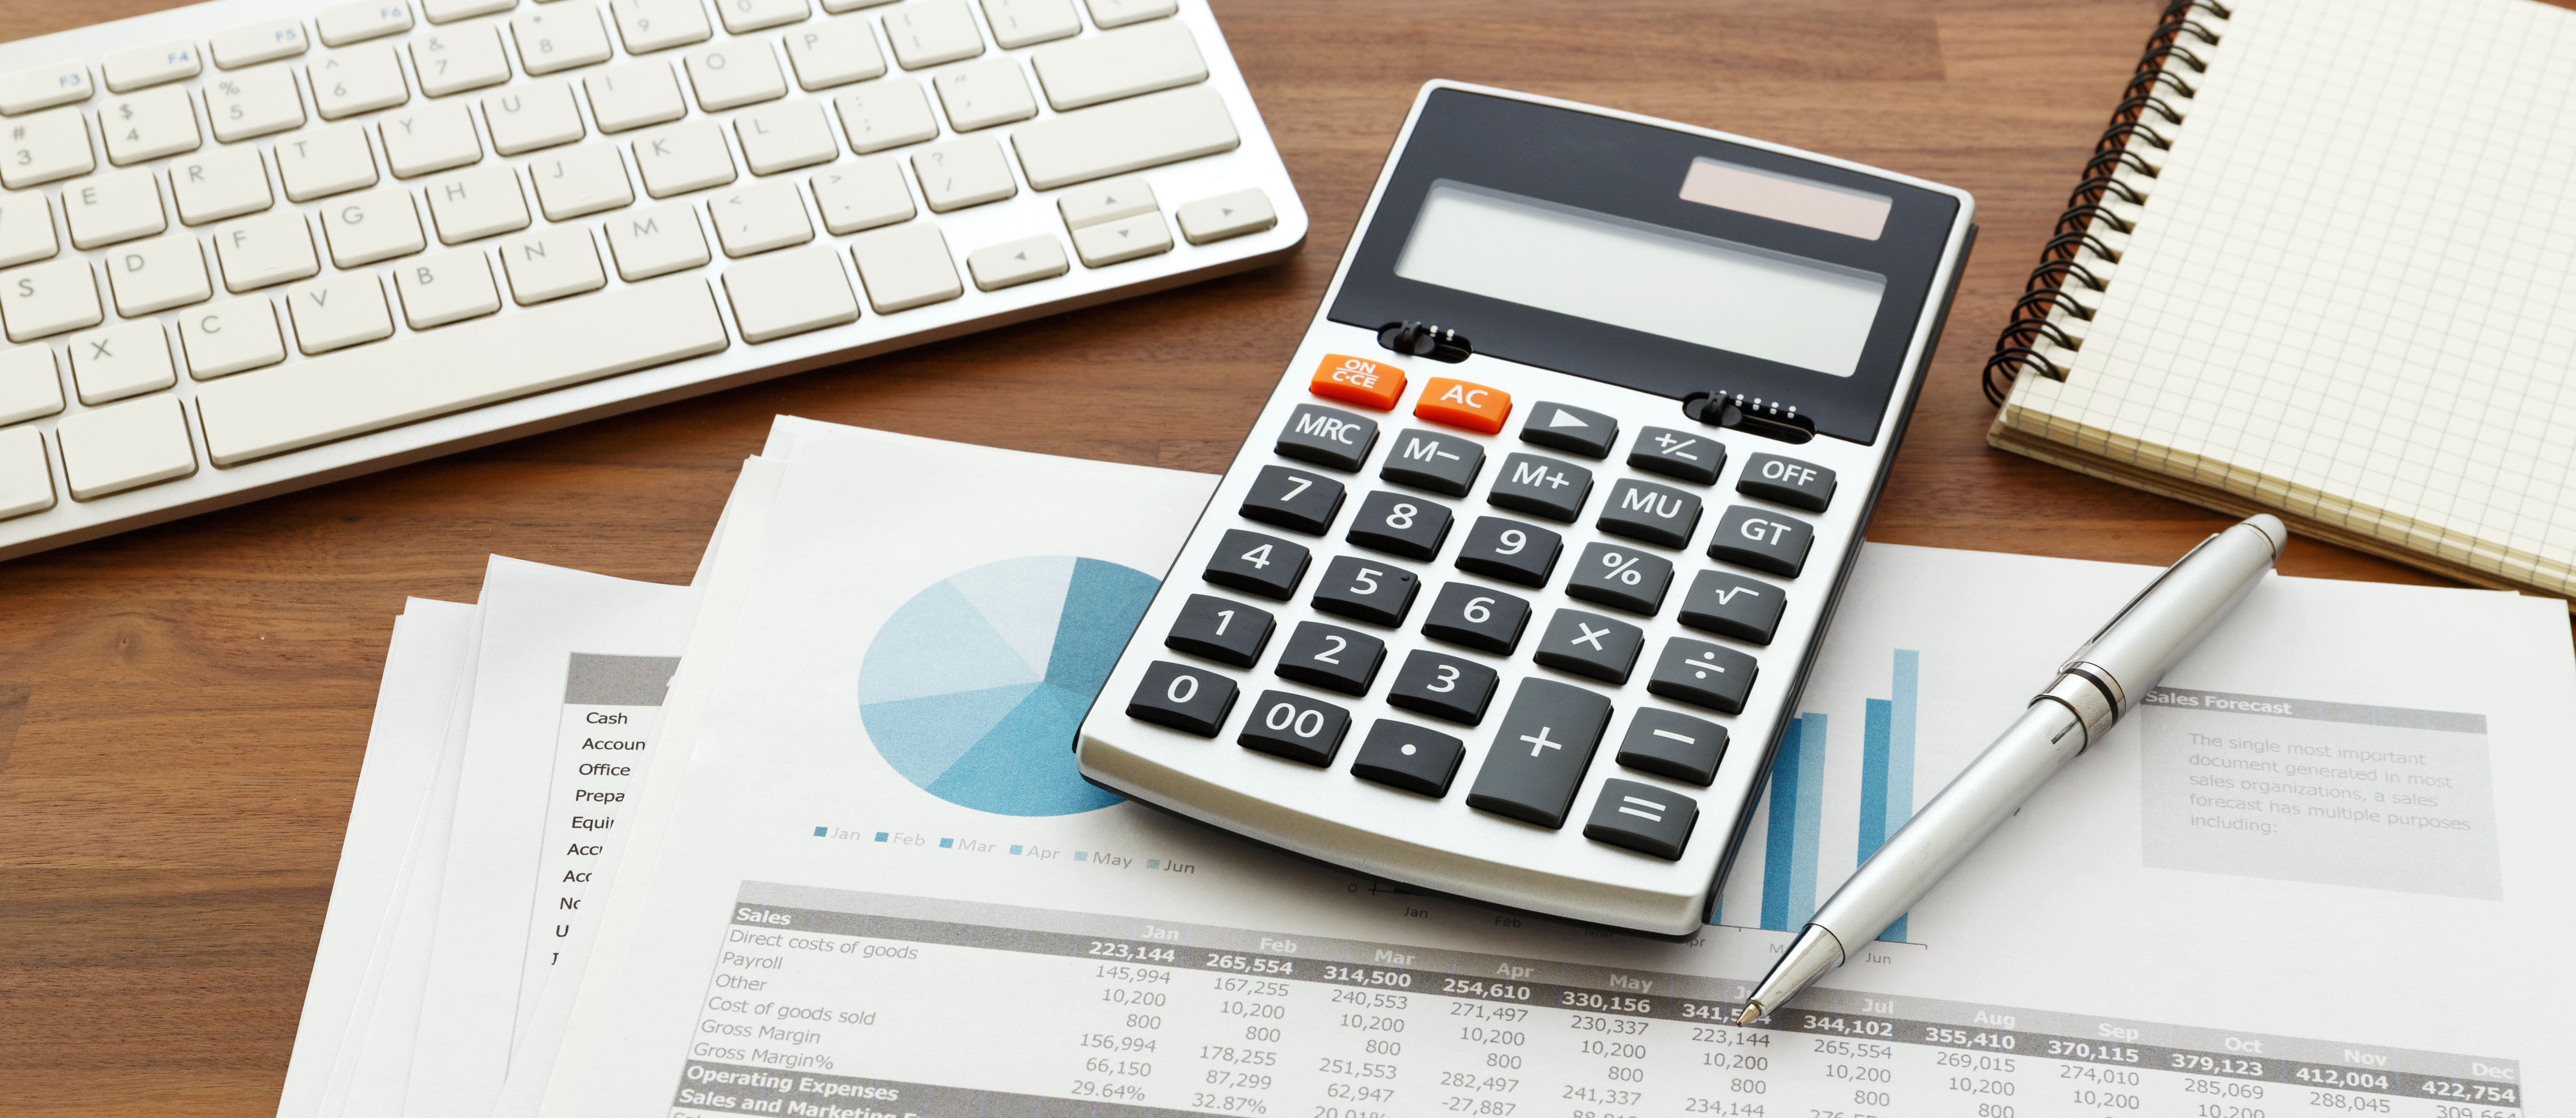 Accounts receivable financing options: factoring or discounting?